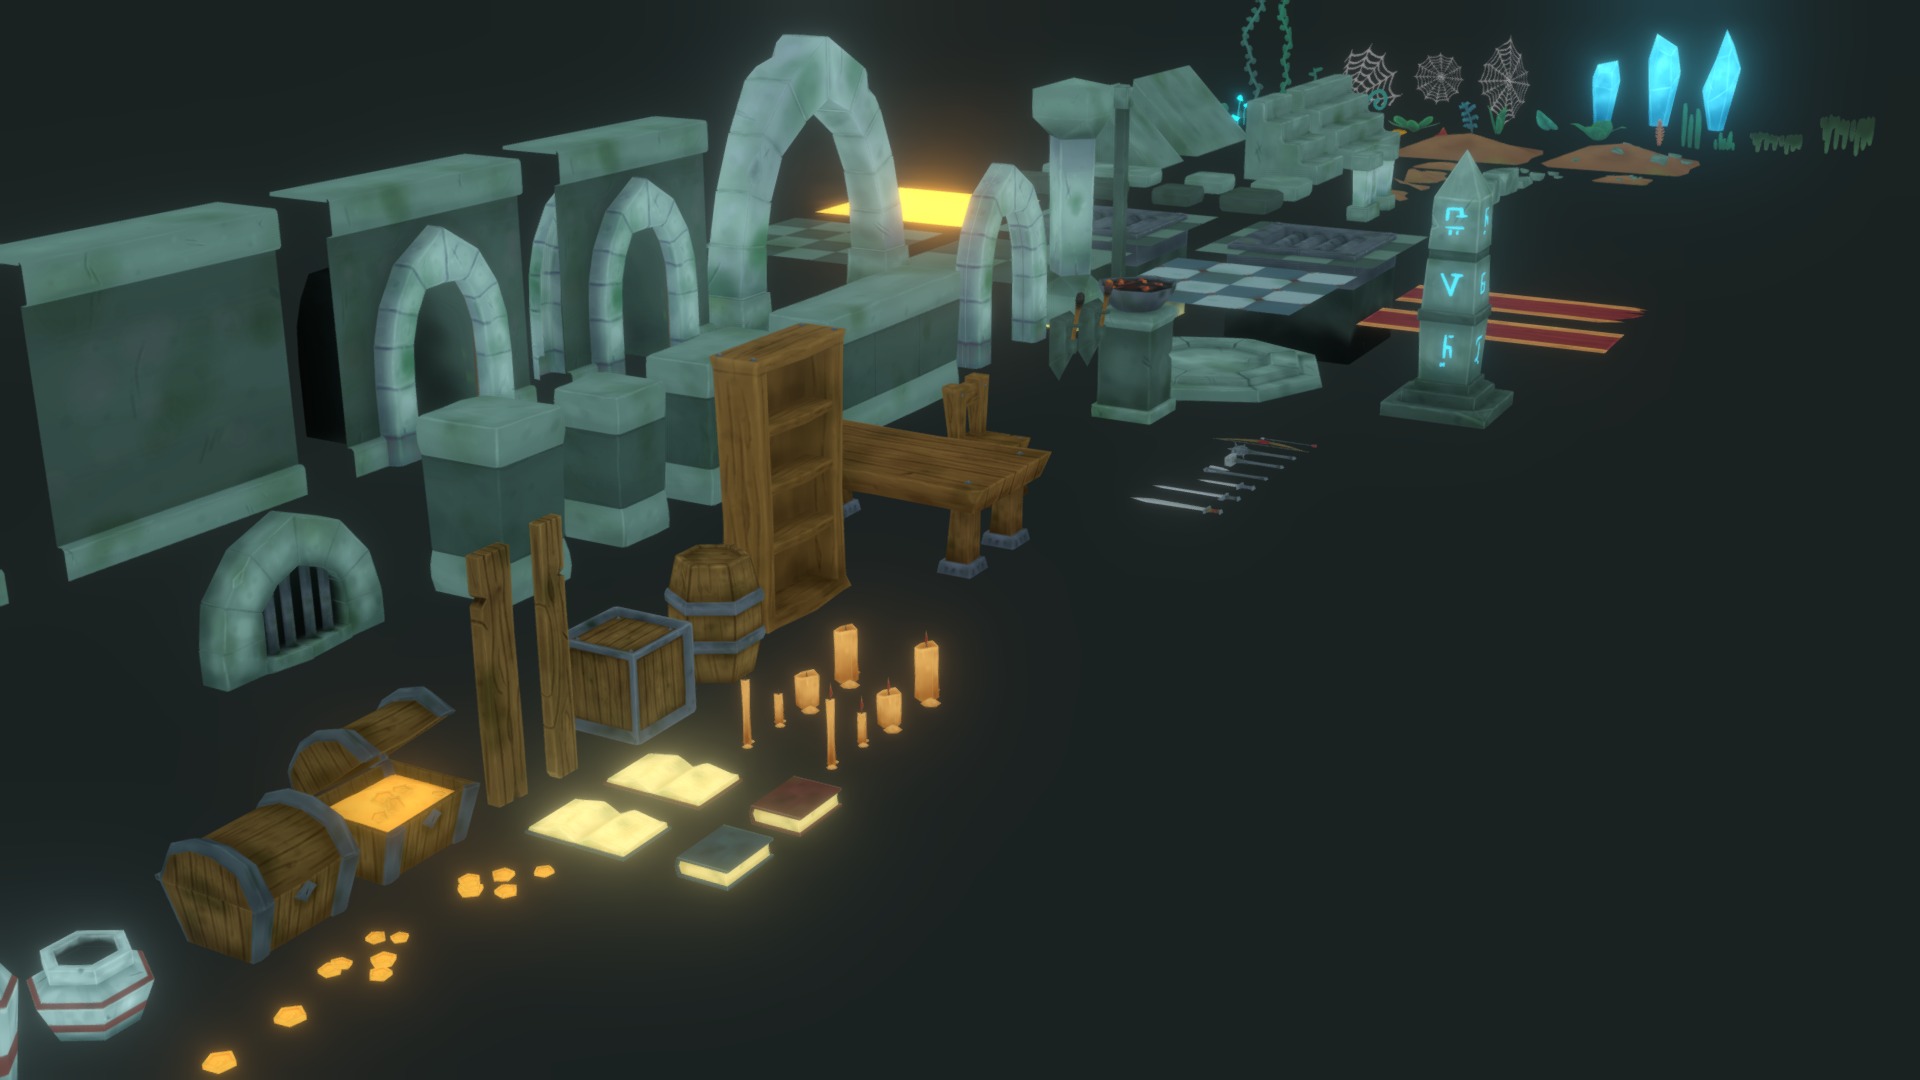 3D model Dungeon Level Assets - This is a 3D model of the Dungeon Level Assets. The 3D model is about a group of chairs and tables with candles on them.